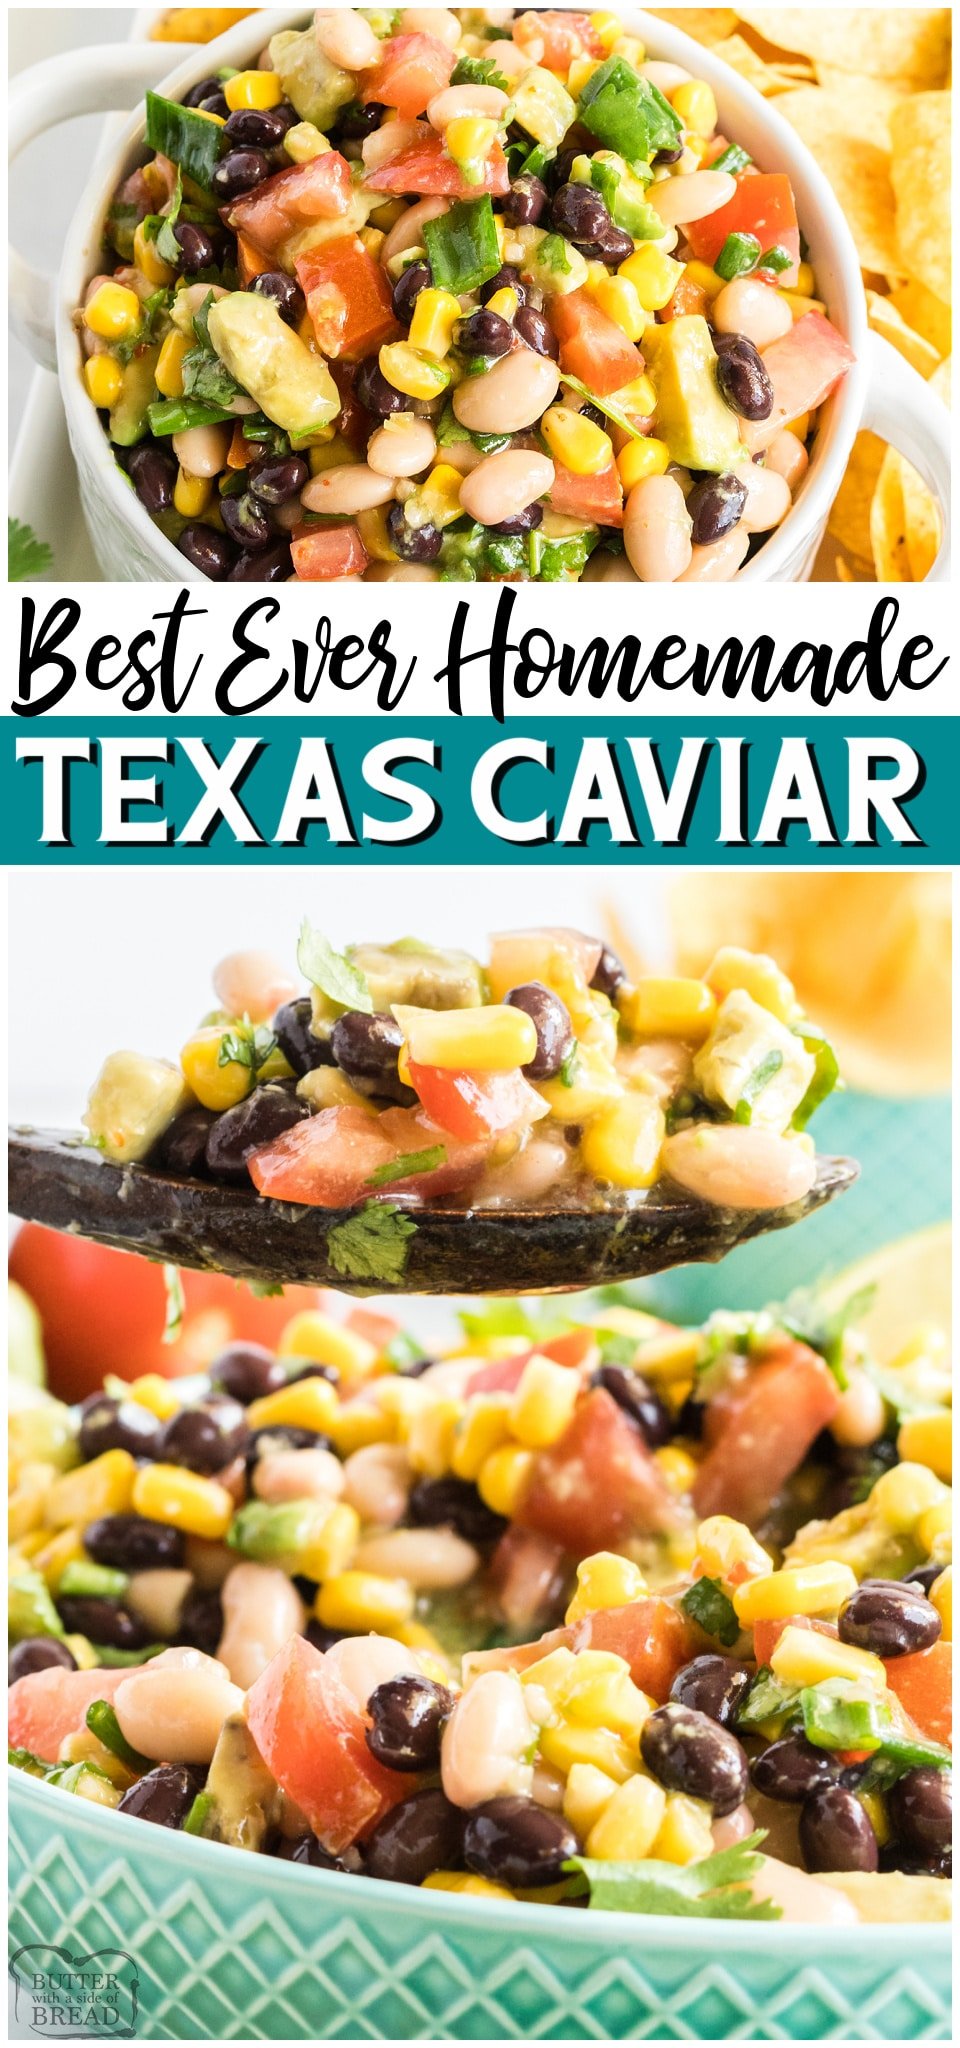 Best Texas Caviar recipe packed with fresh flavors like sweet corn, cilantro, tomato & avocado. Easy Texas Caviar Bean Dip is a popular savory appetizer perfect for game day!